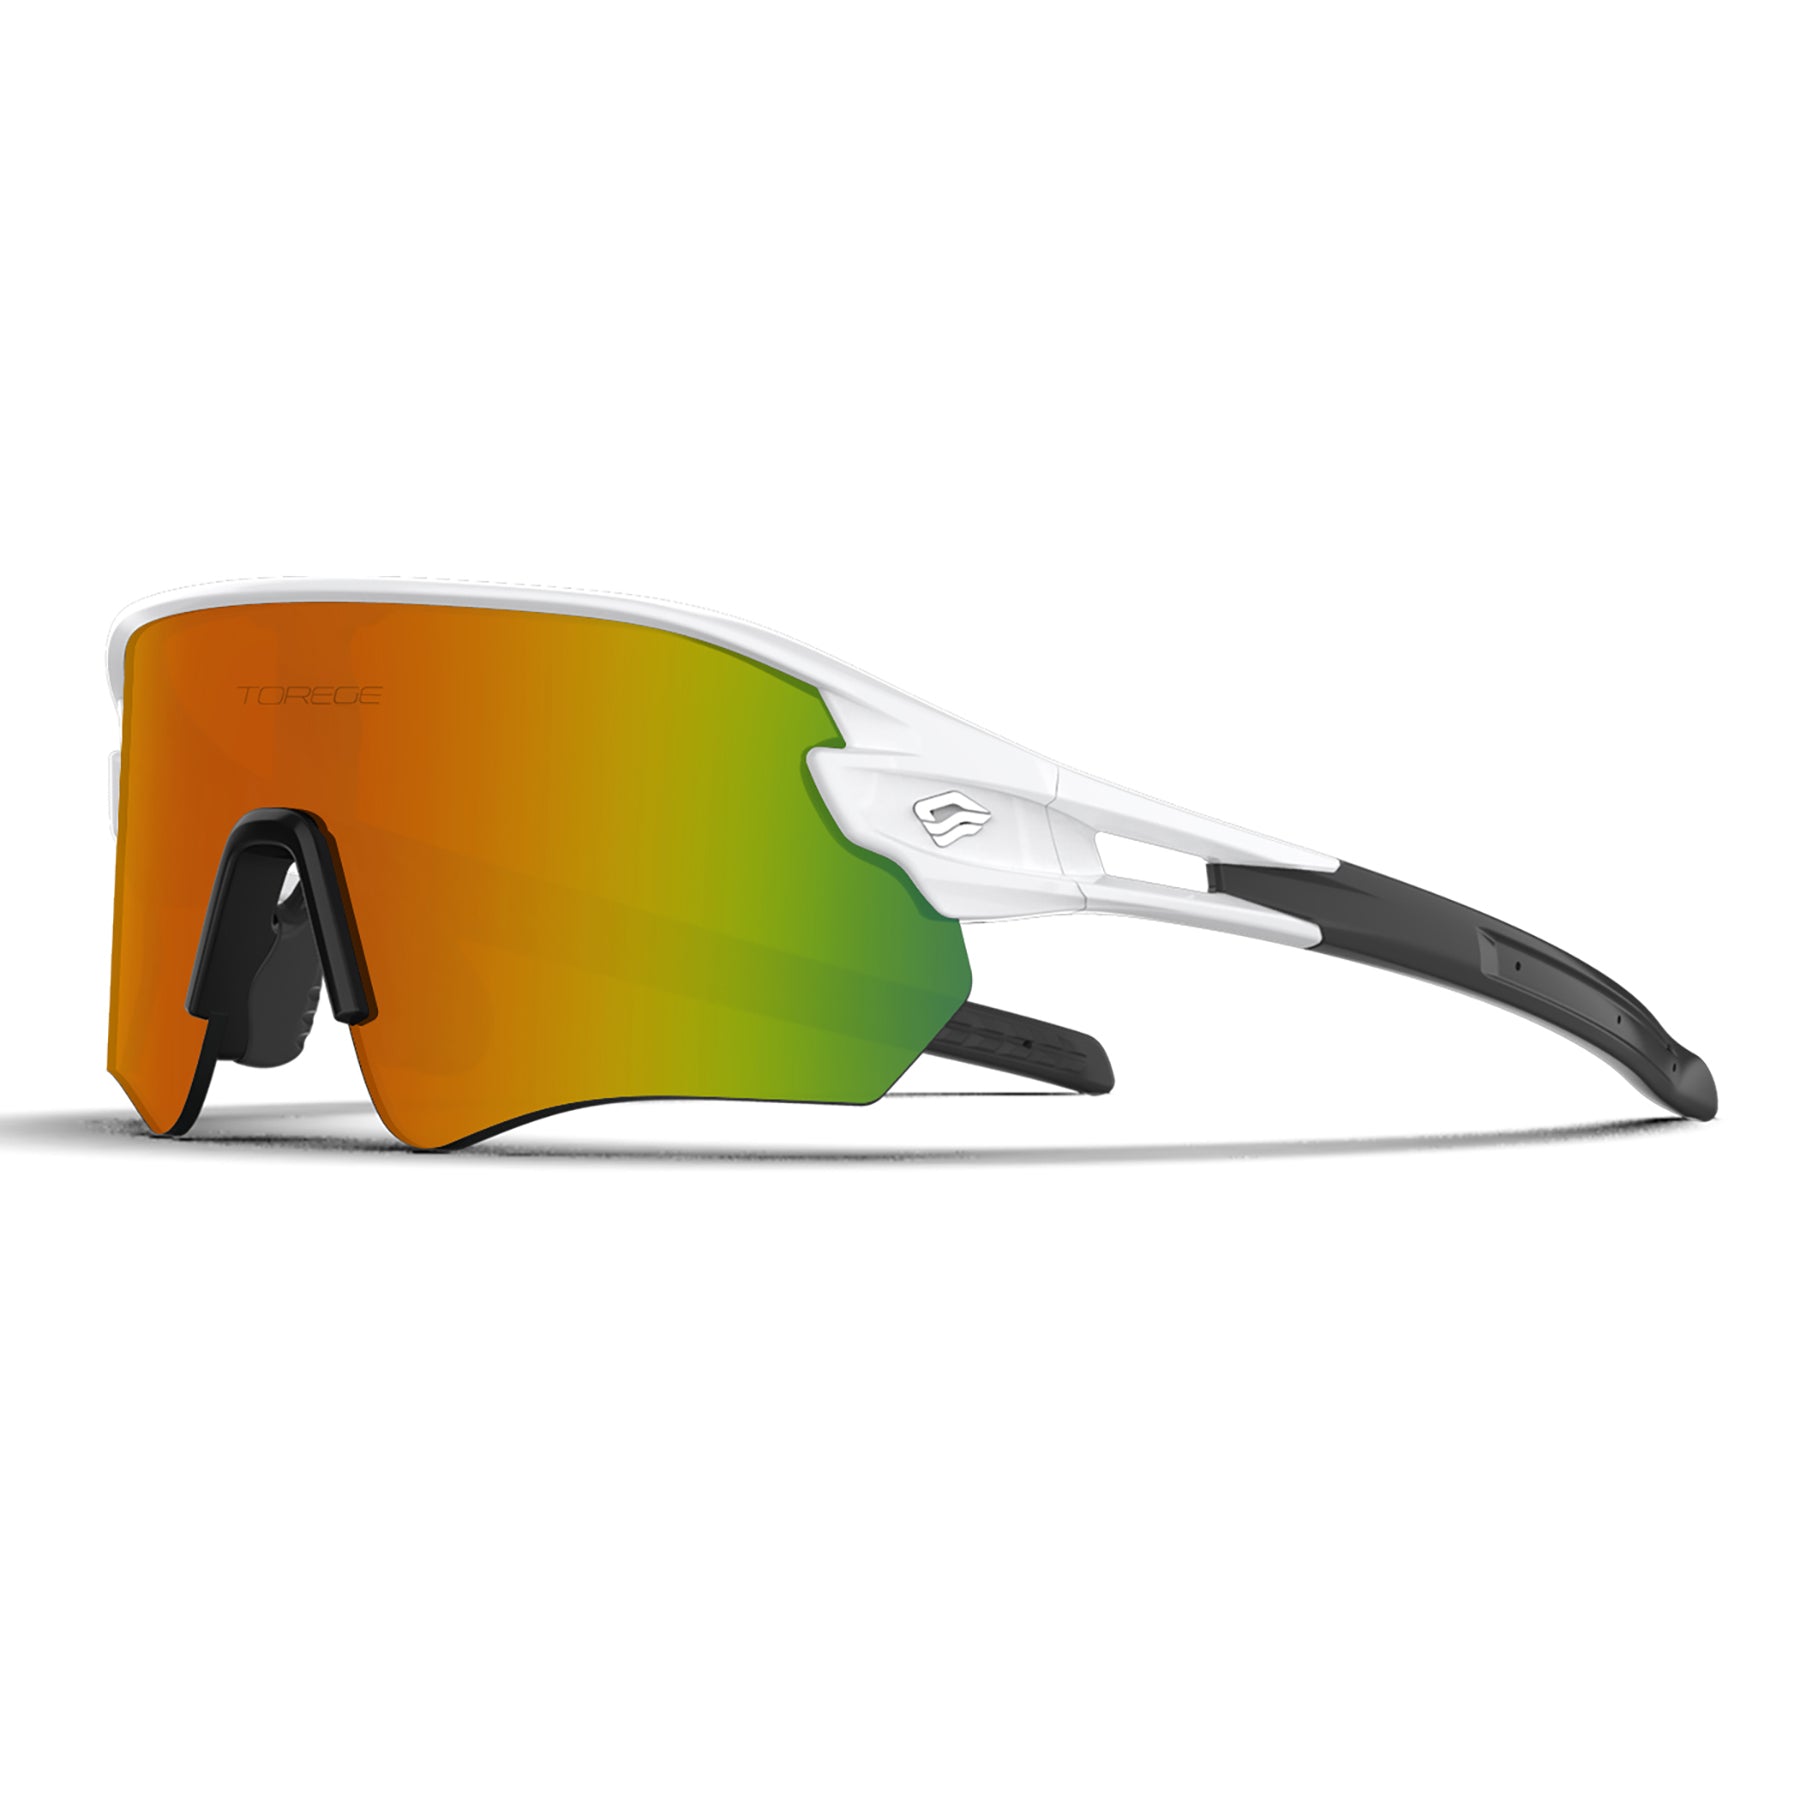 Quest Aurora Ultra Lightweight Sports Sunglasses for Men & Women with Lifetime Warranty - Ideal for Cycling, Hiking, Fishing, Golf & Running - White